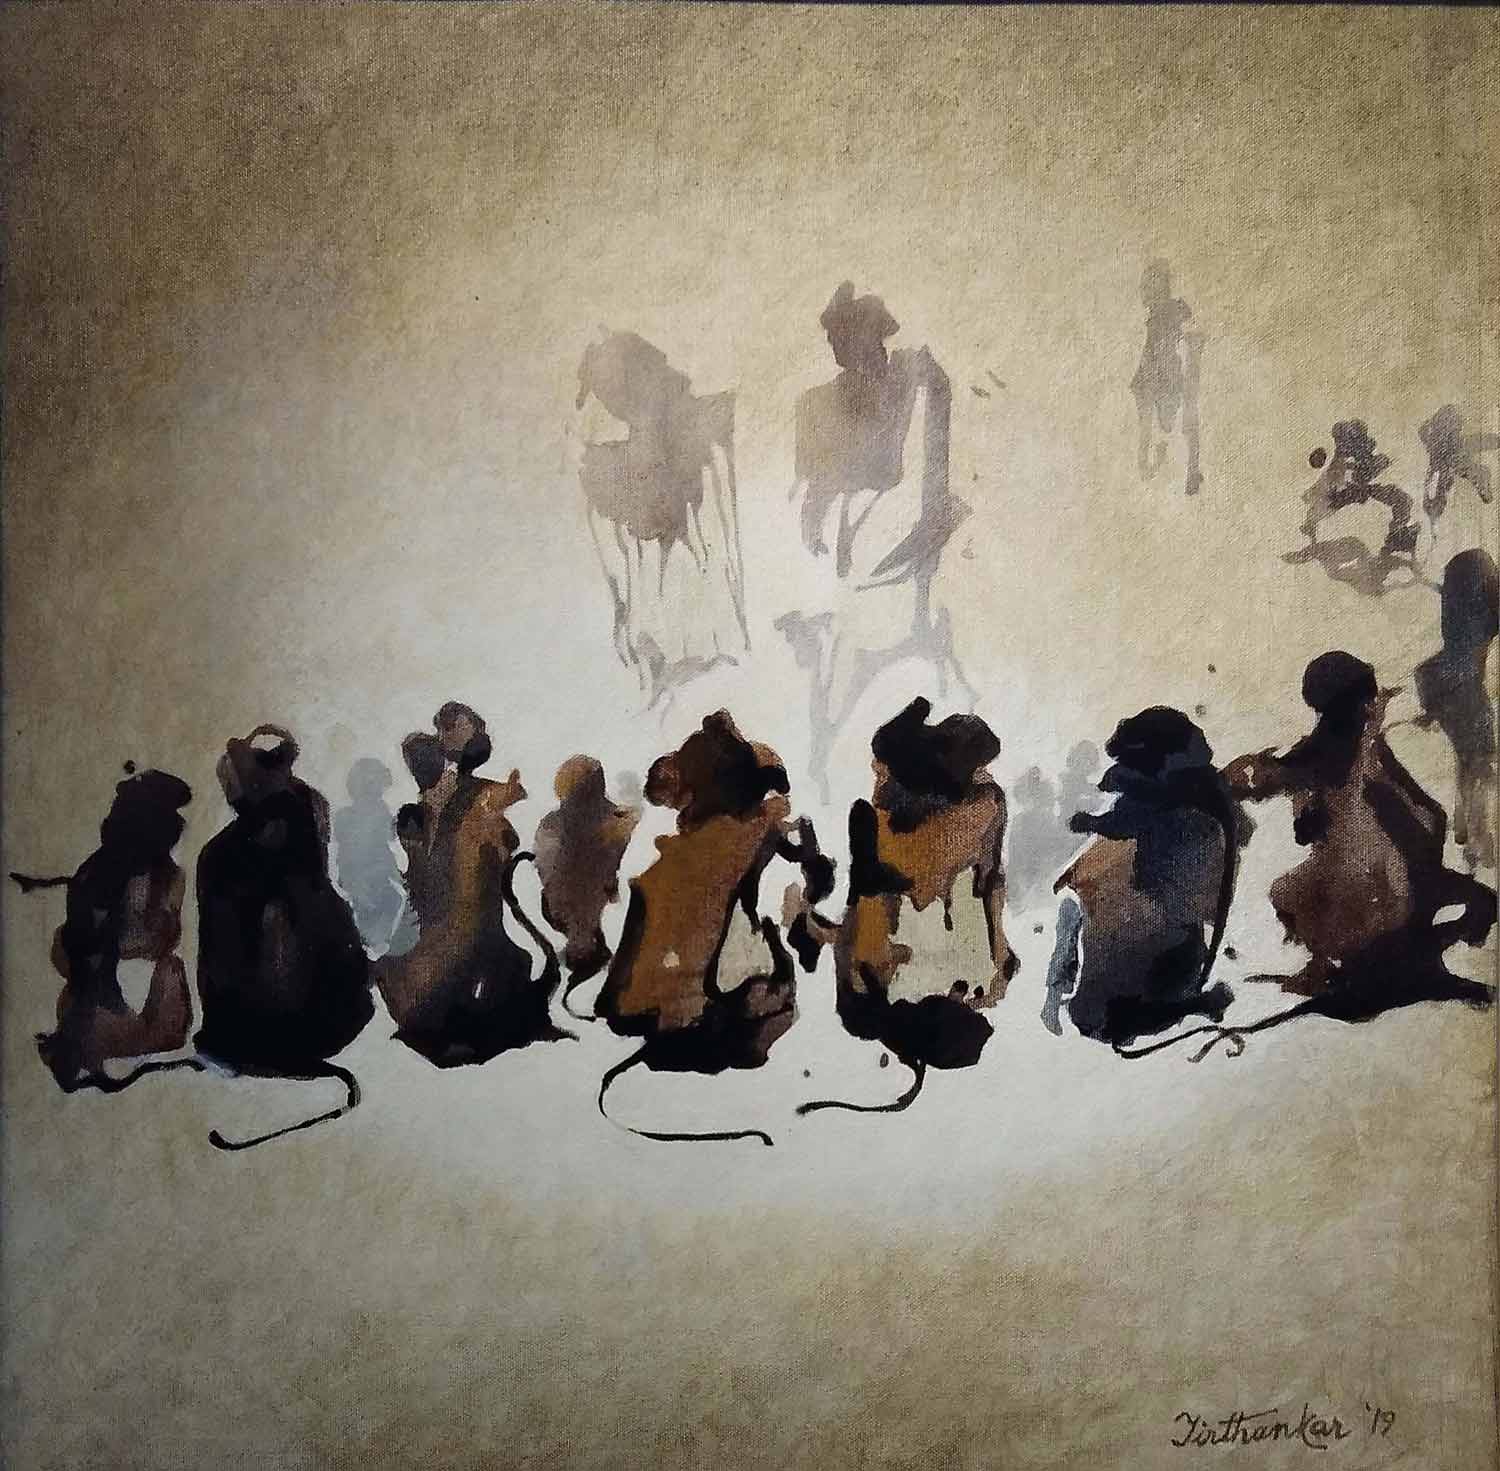 Figurative Painting with Acrylic on Canvas "Monkey" art by Tirthankar Biswas